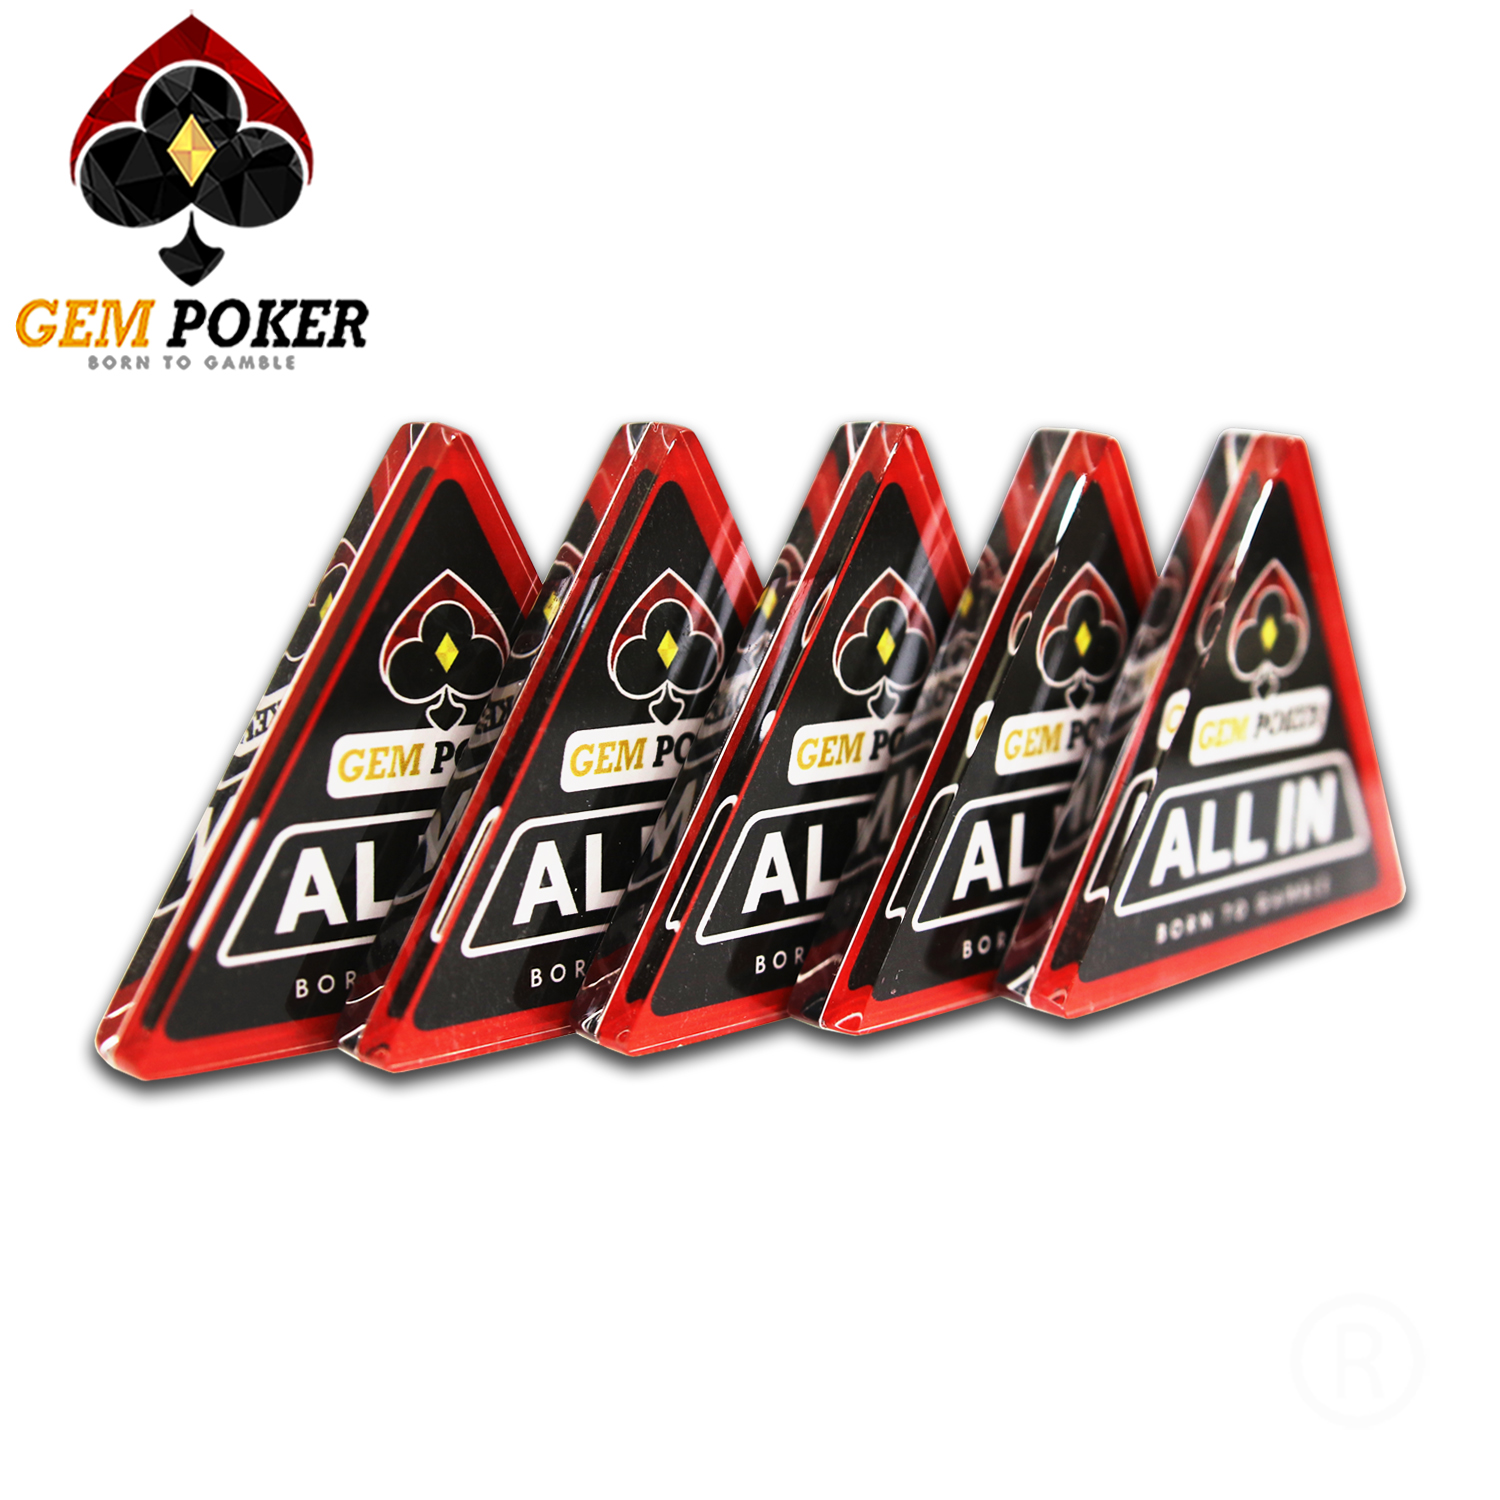 NÚT ALL-IN GEMPOKER